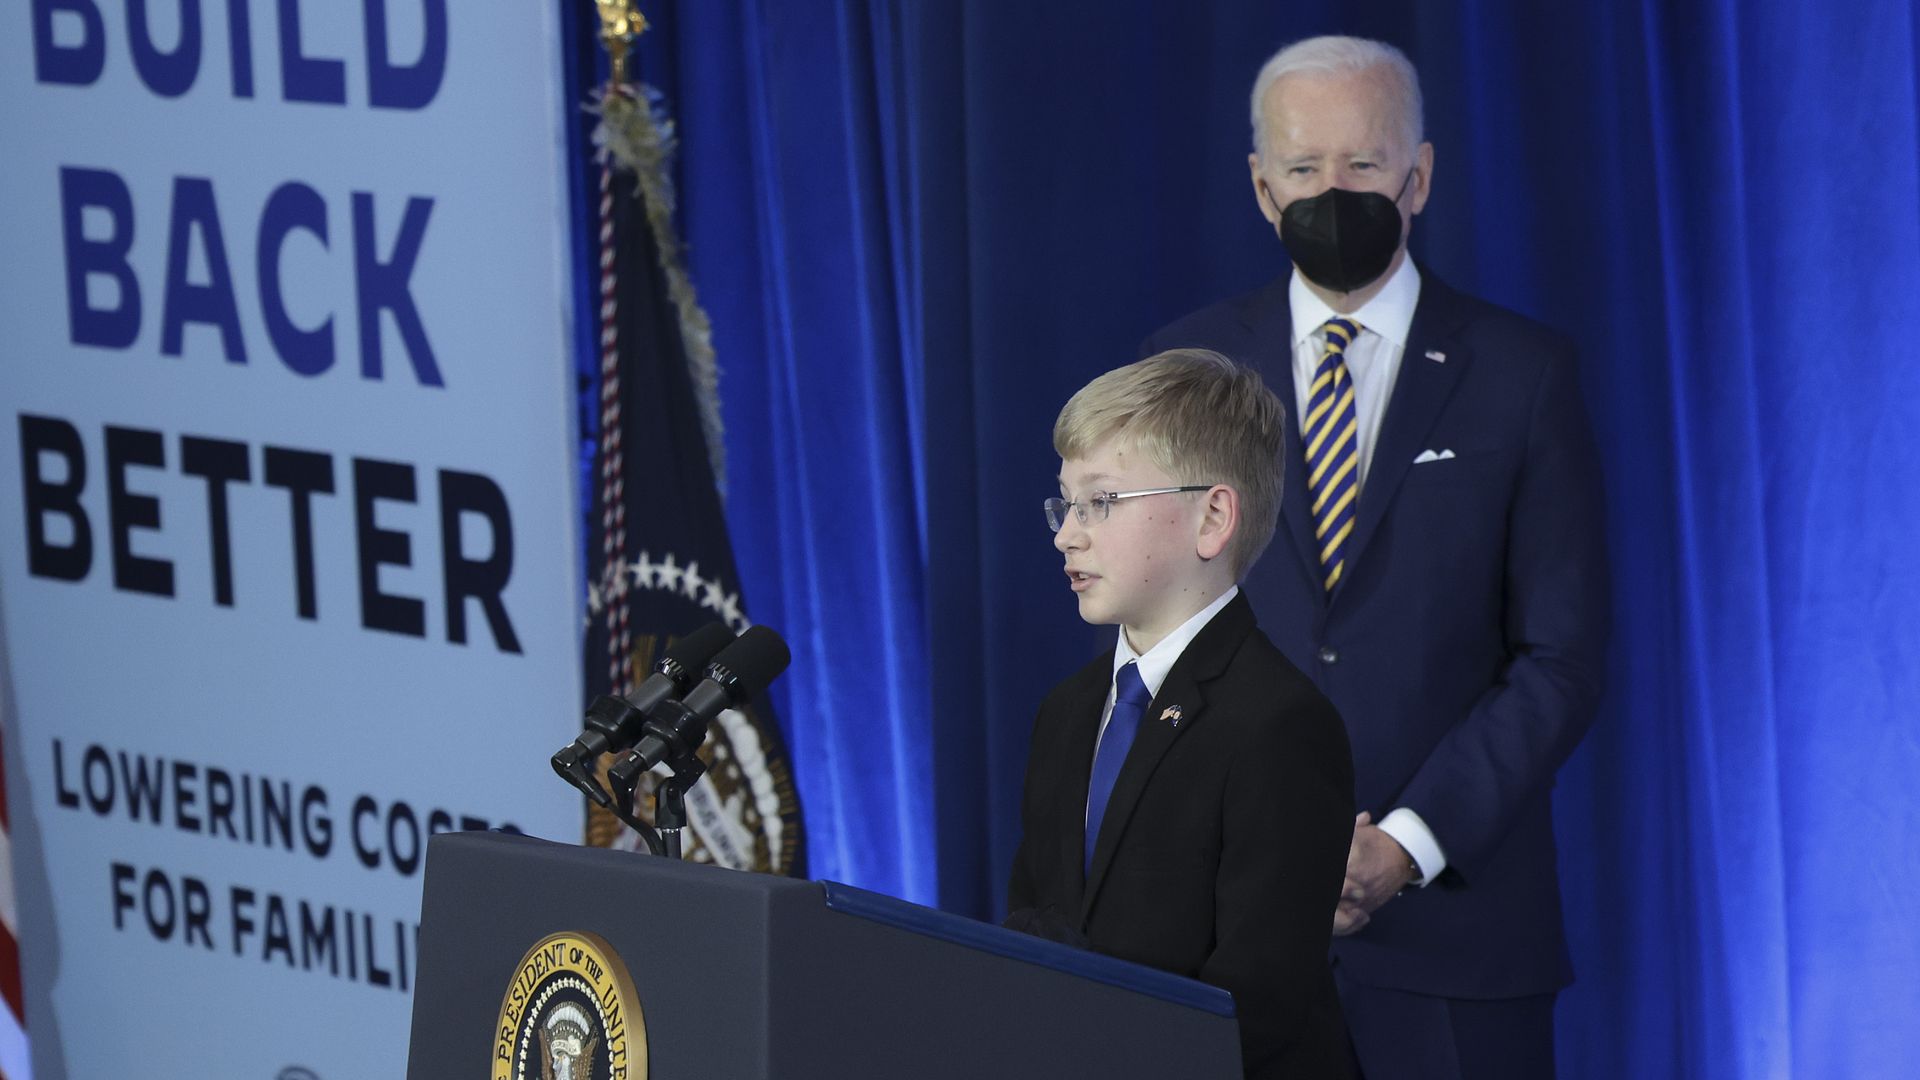 President Biden is seen watching as a 12-year-old introduces him before an event in Virginia.